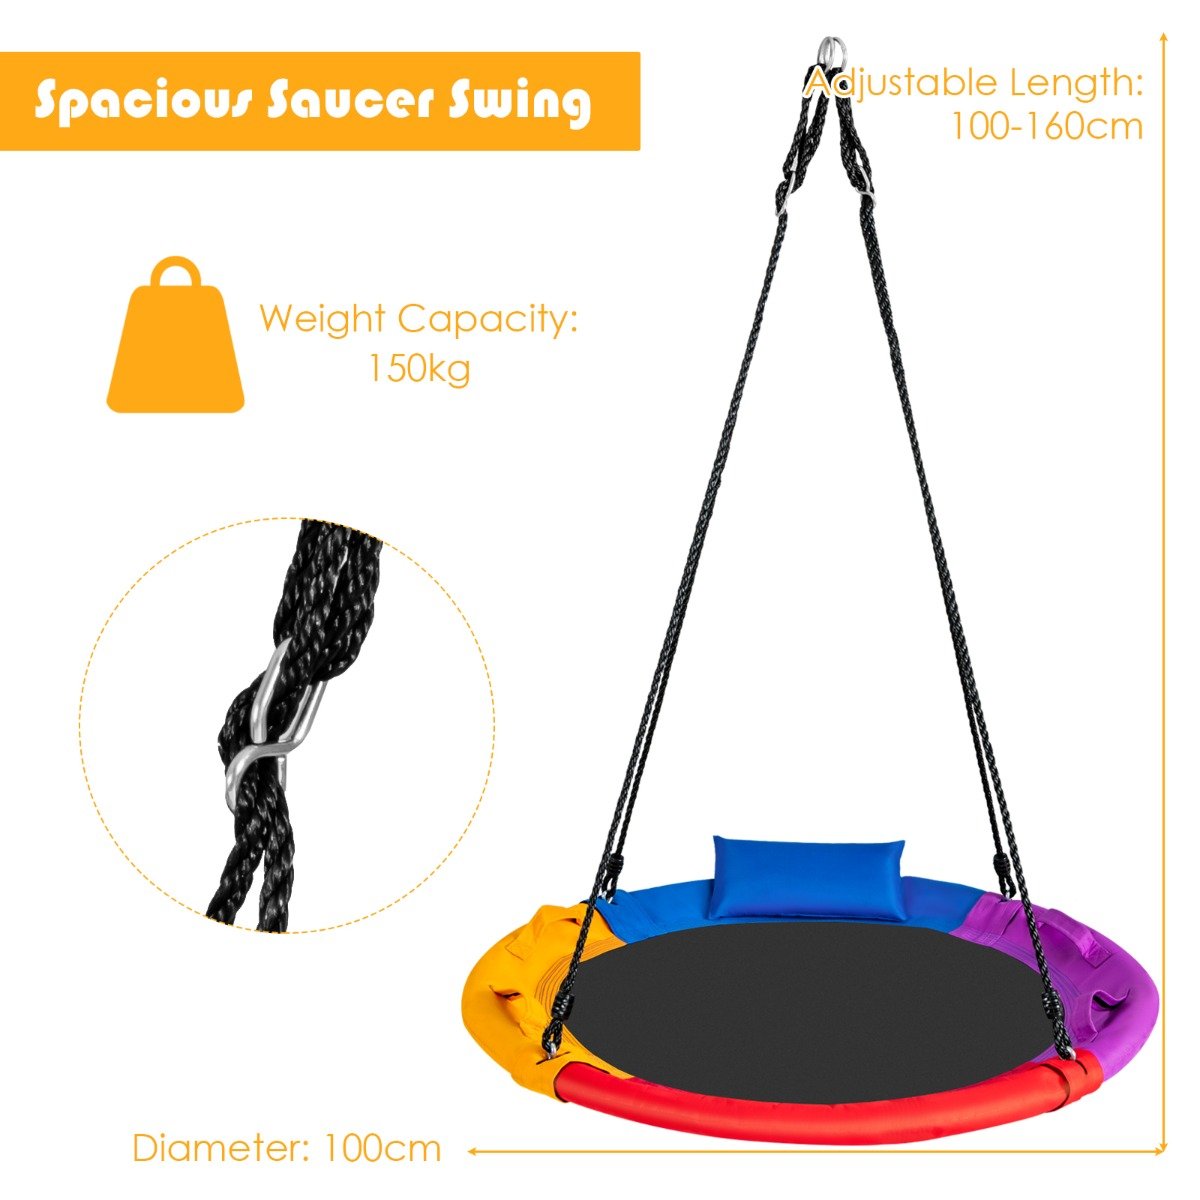 Round Platform Swing for Kids: colourful Saucer with Comfy Pillow